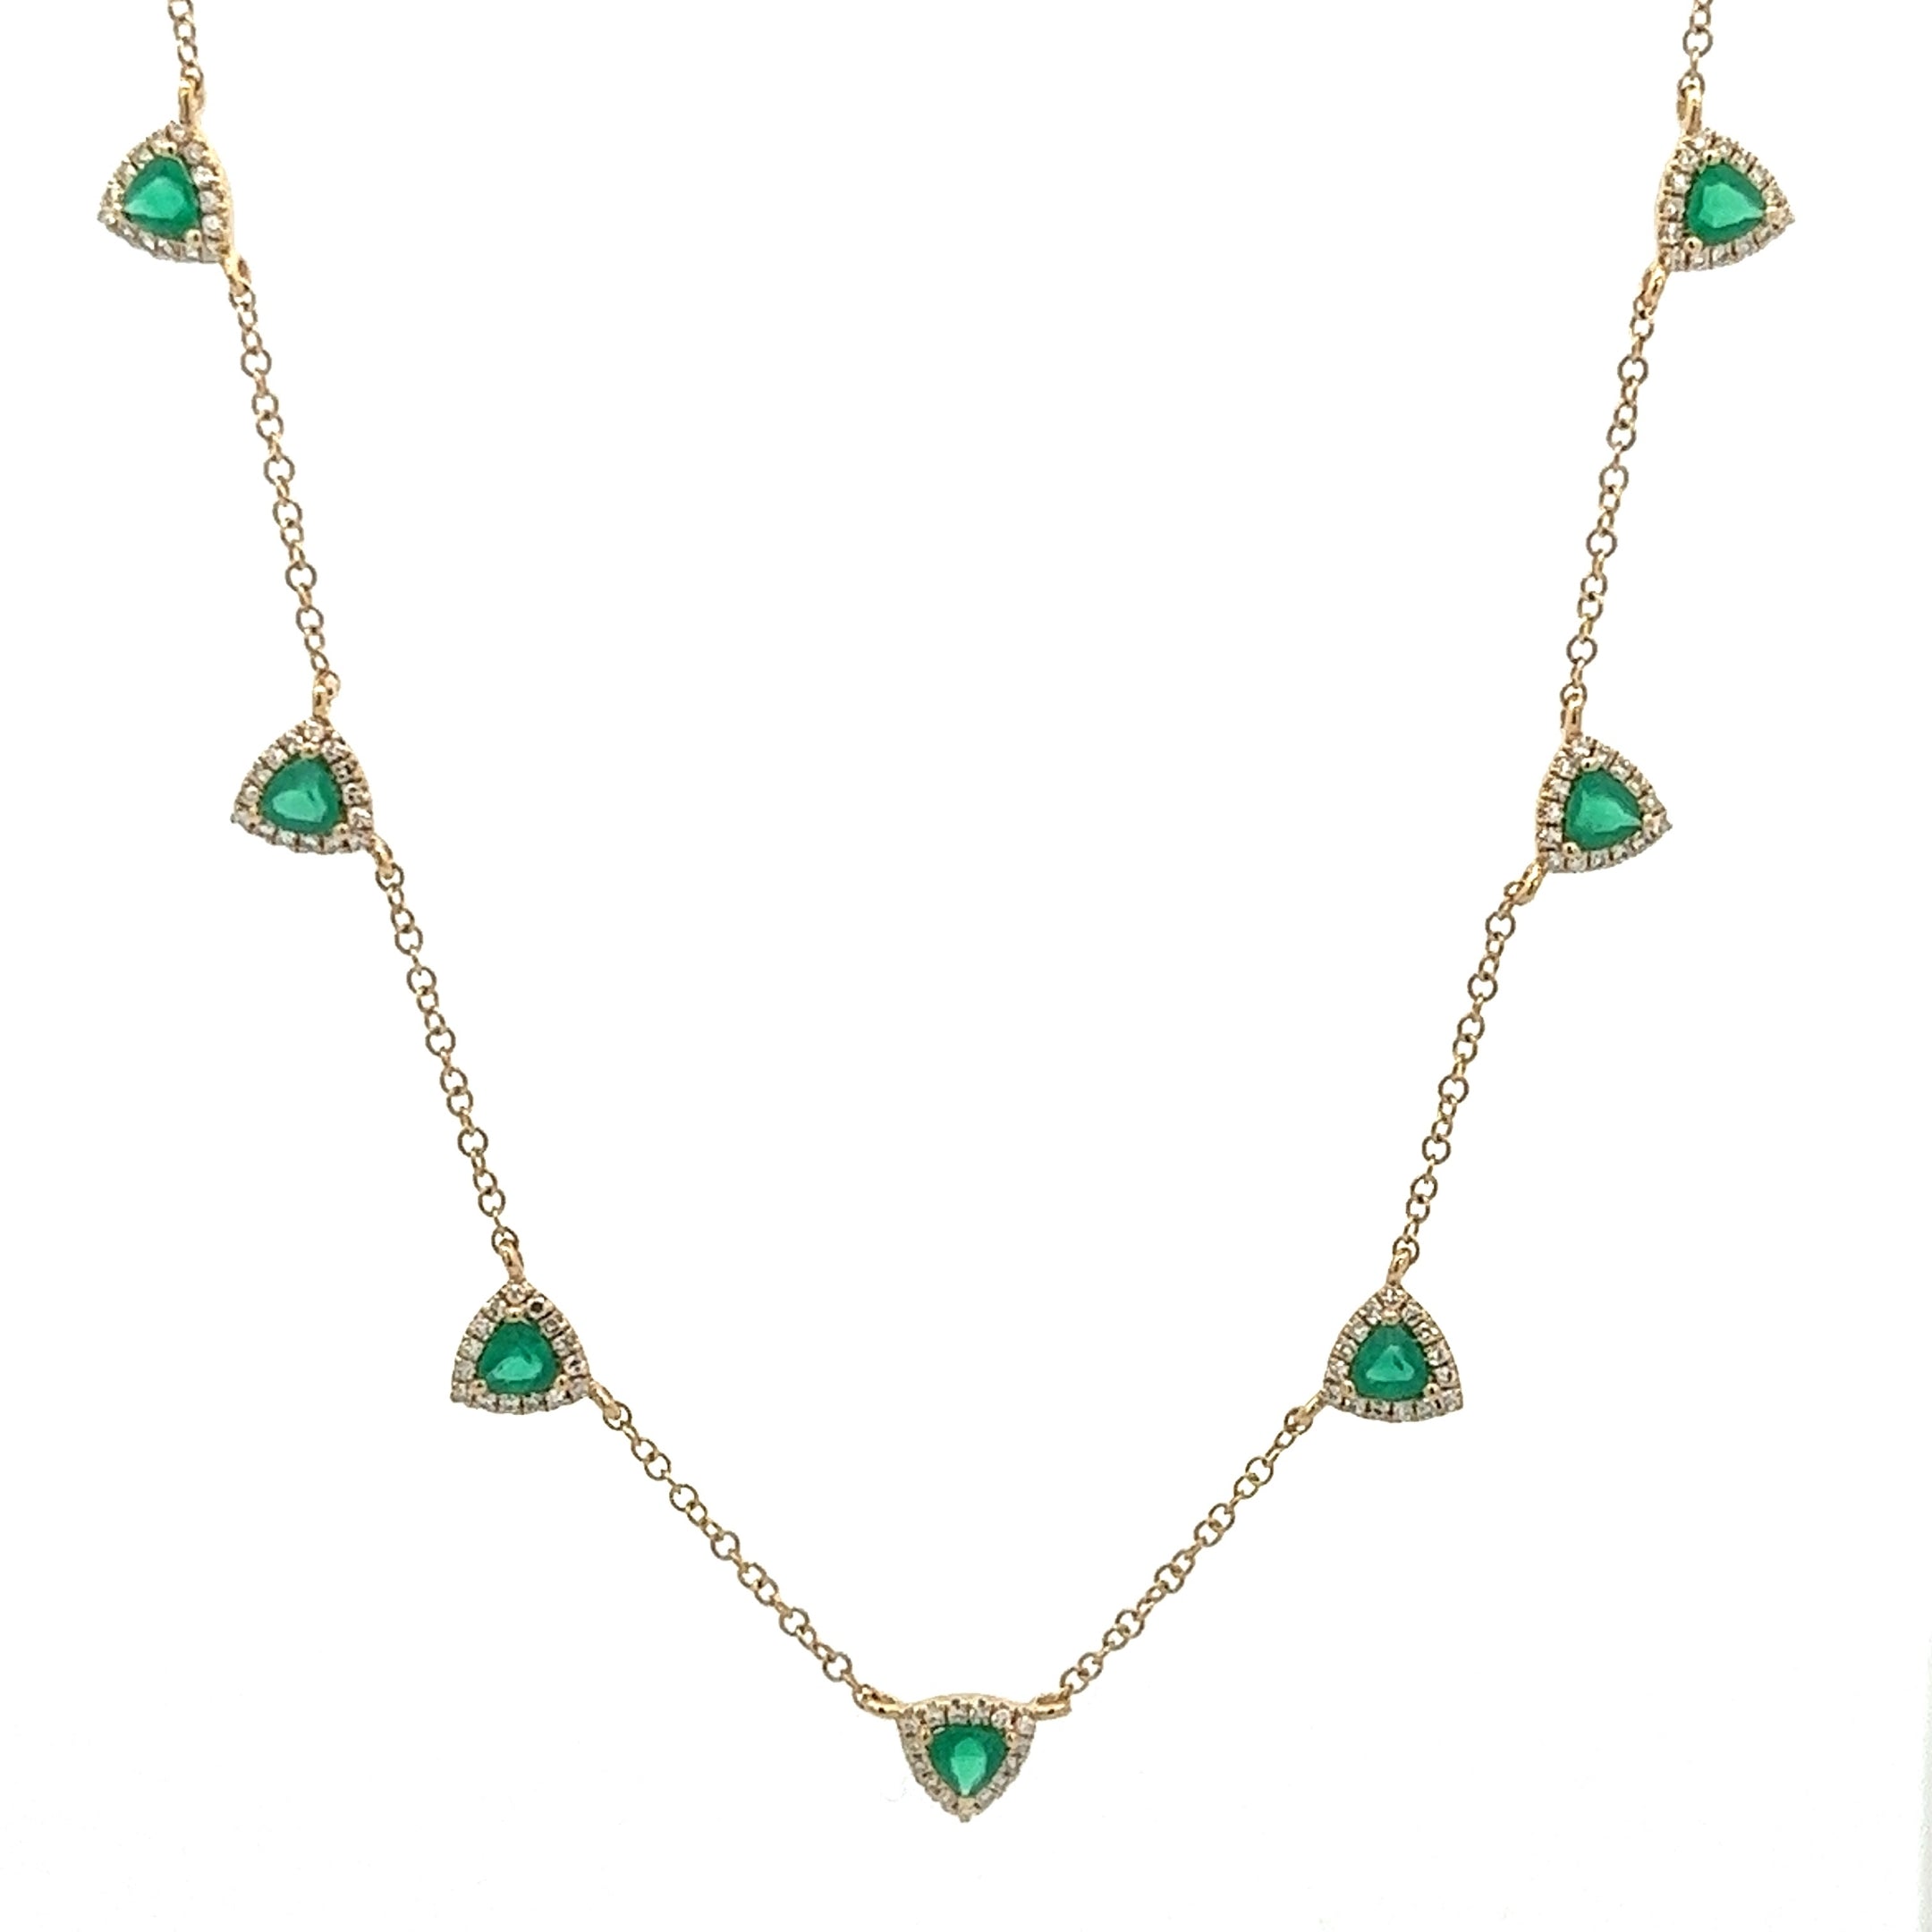 14K GOLD EMERALD NECKLACE